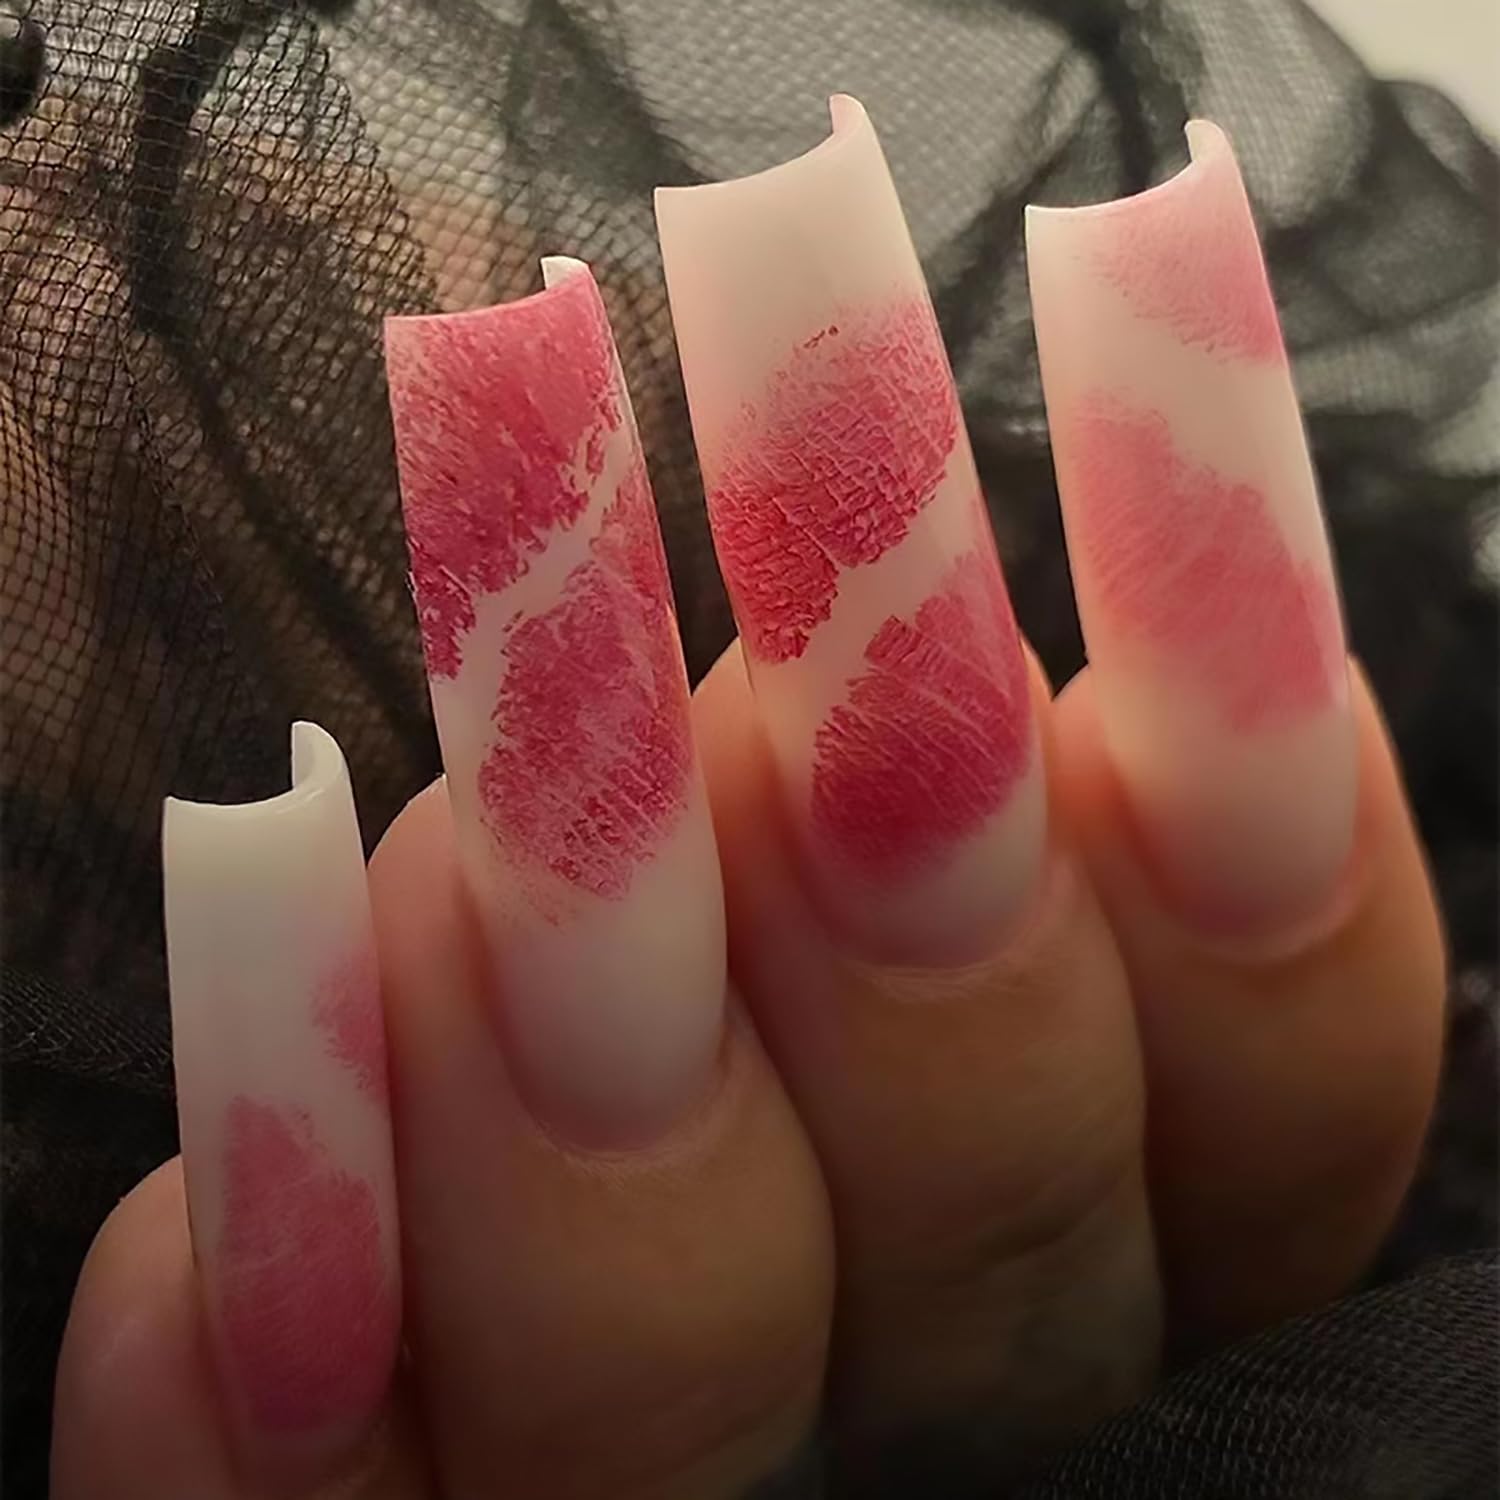 Valentine's Day Press on Nails Square Long Fake Nails Valentines Matte False Nails With Red Lips Designs Full Cover Stick on Nails Acrylic Romantic Artificial Nails for Women Glue on Nails 24Pcs Valentines nails 1